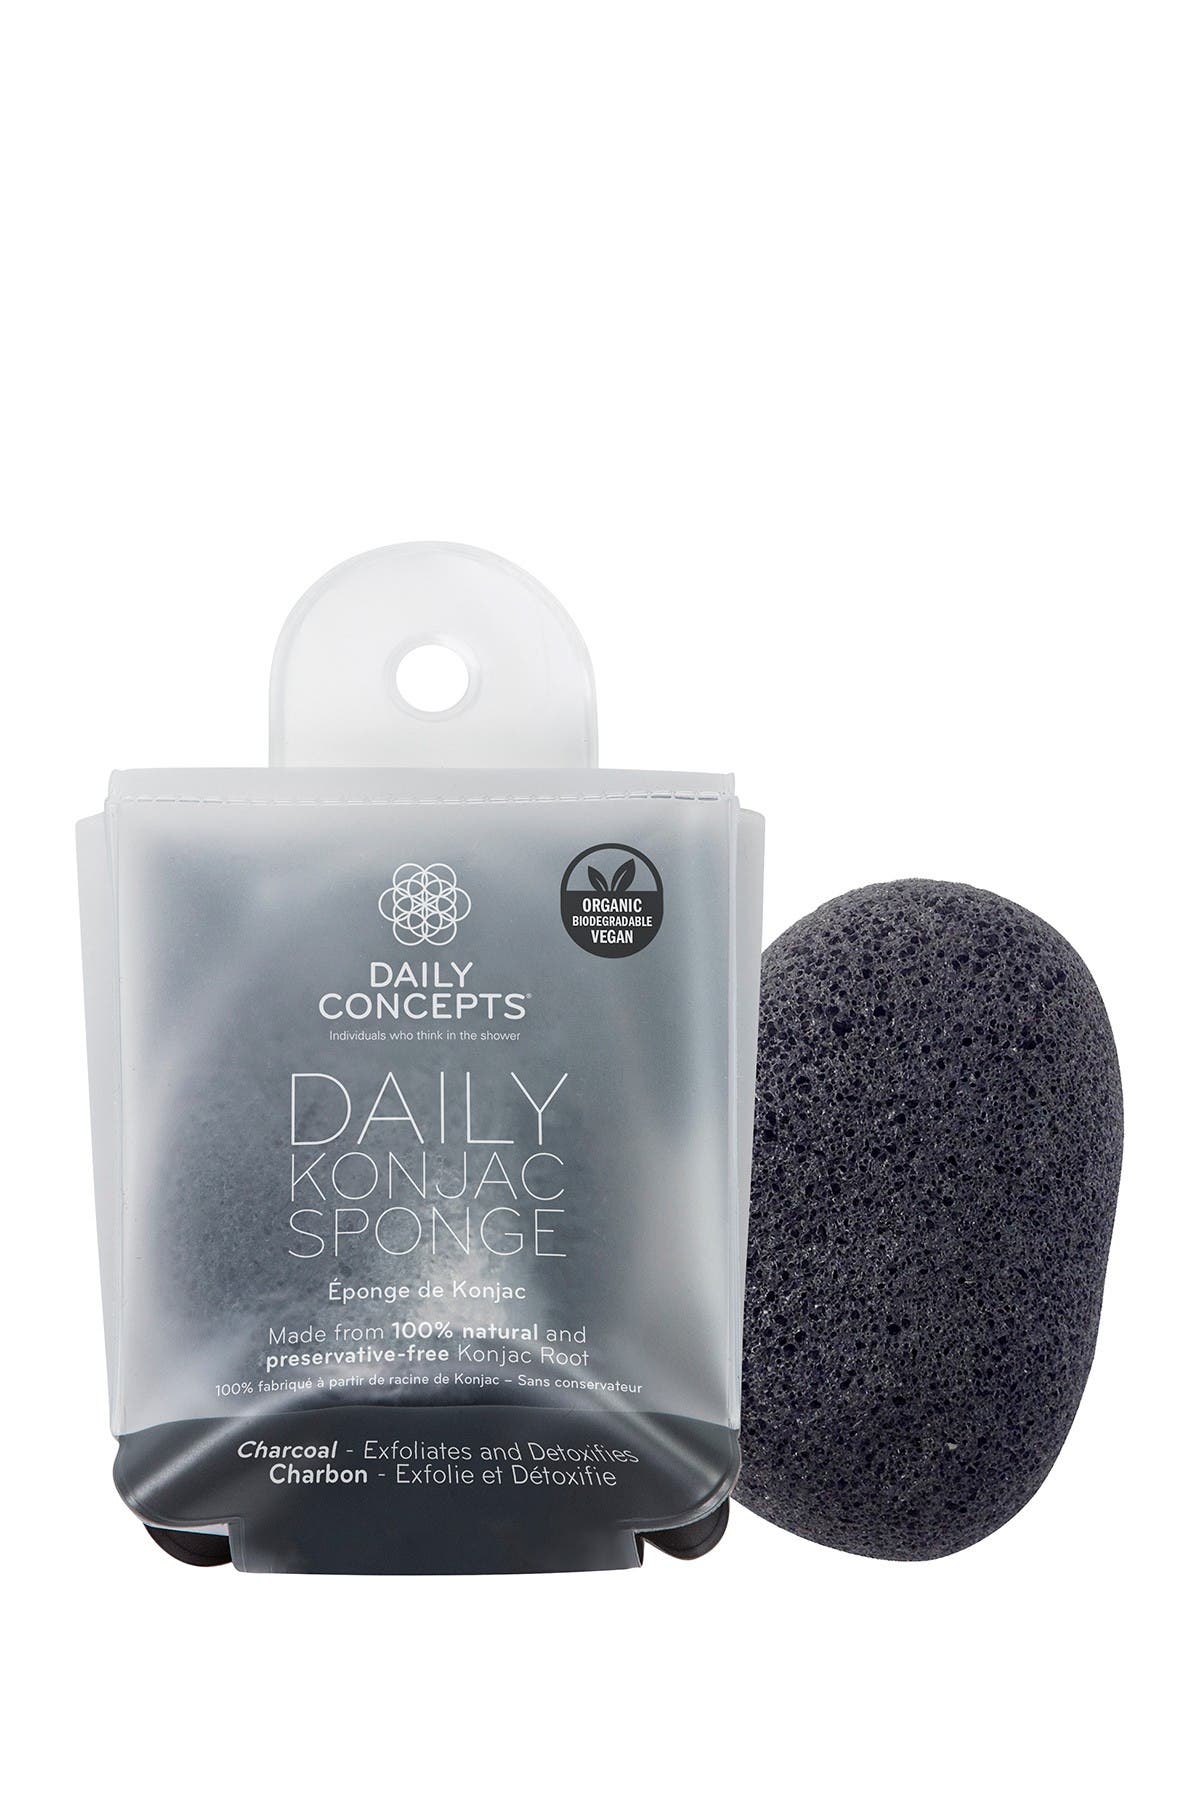 Daily Concepts Daily Konjac Sponge In Charcoal